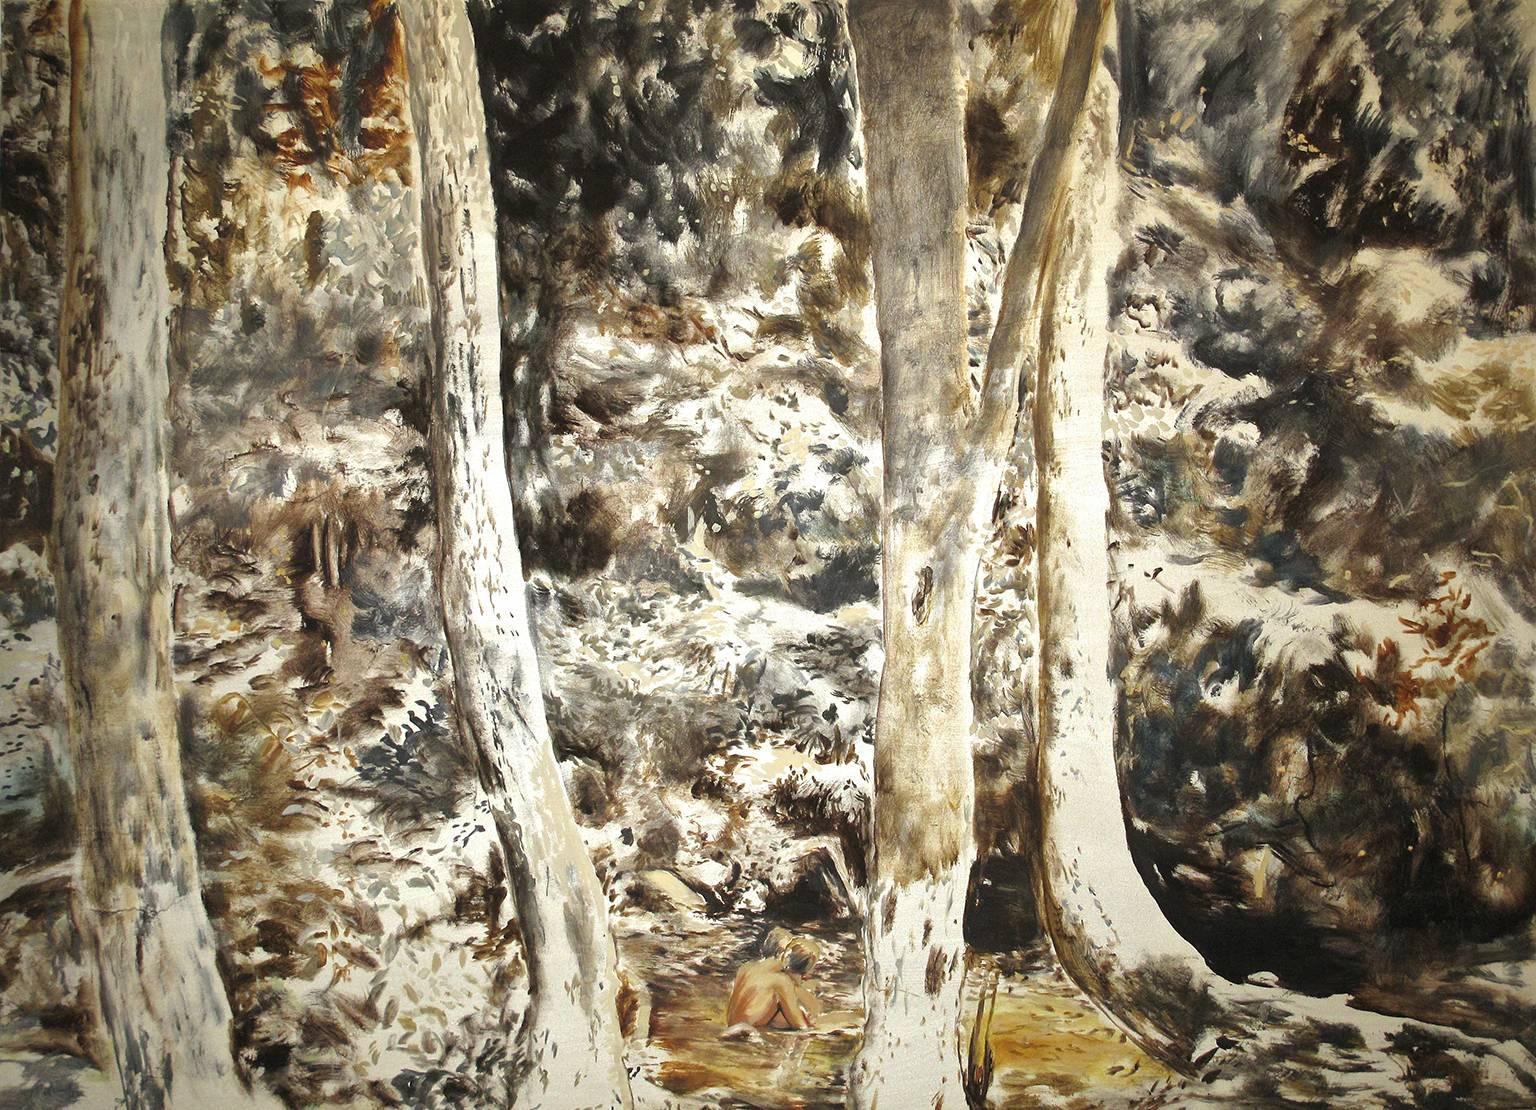 Couple in the Stream  55 X 76 - Painting by Antonio Ugarte